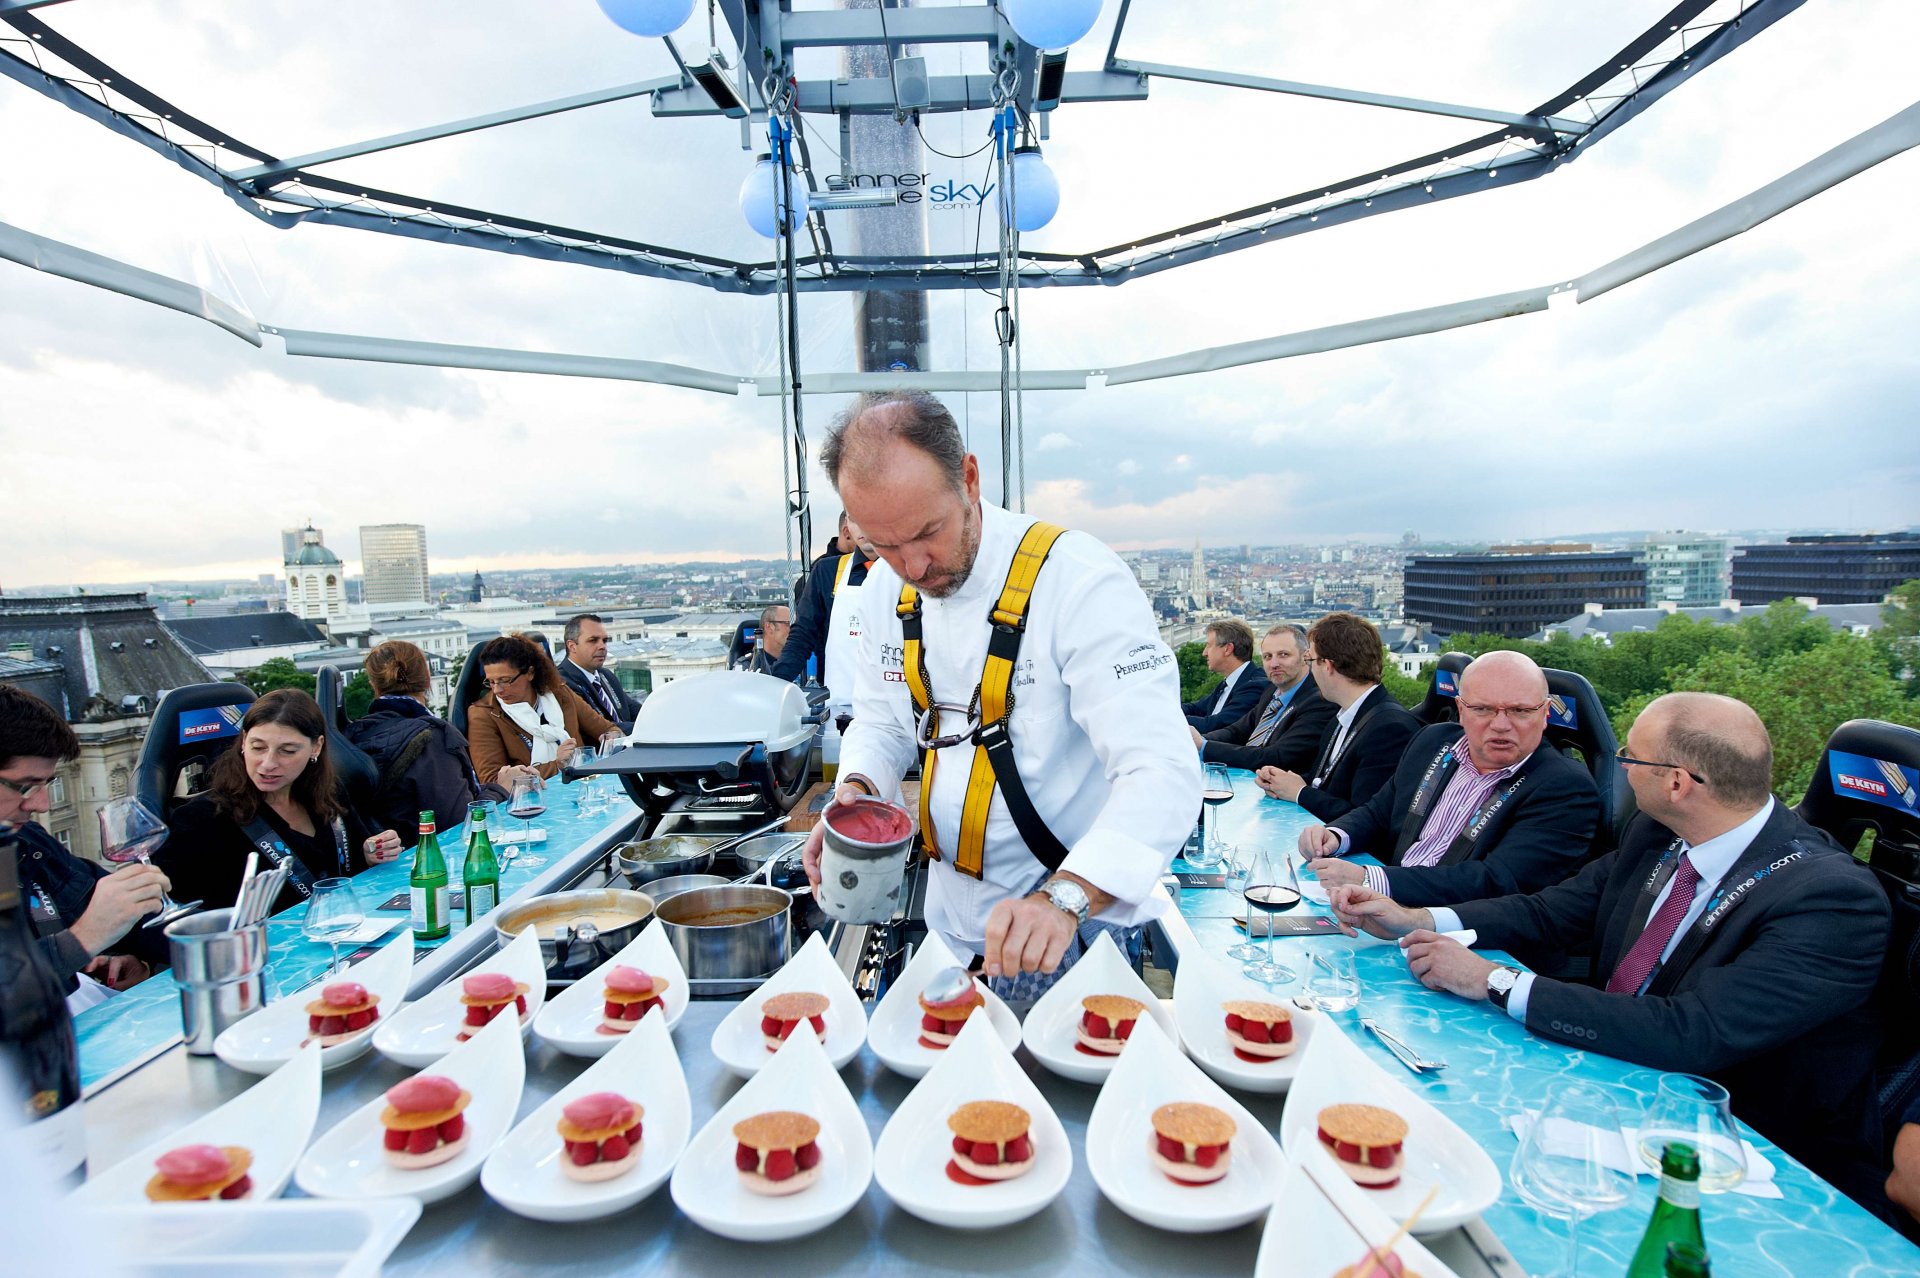 Dinner In The Sky: A Dining Experience In High Style